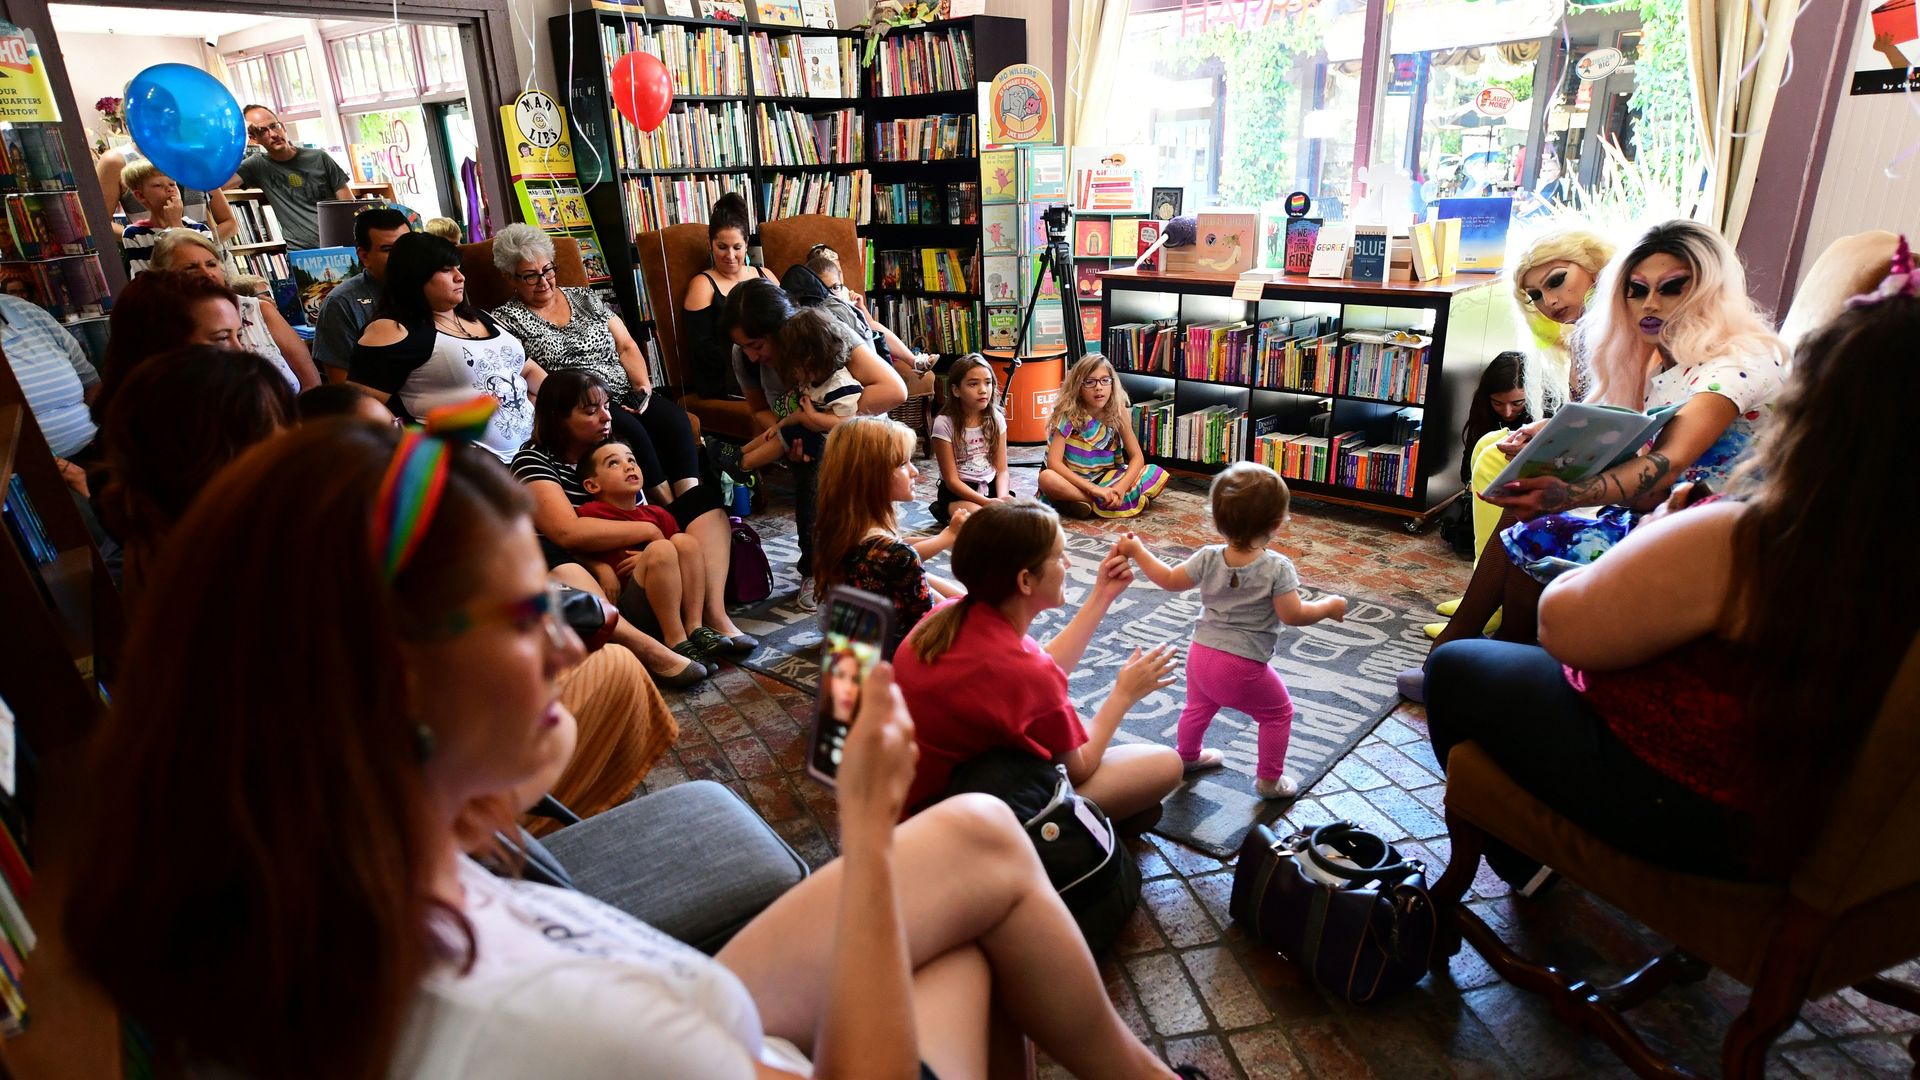 People gathered for Drag Queen Story Hour 